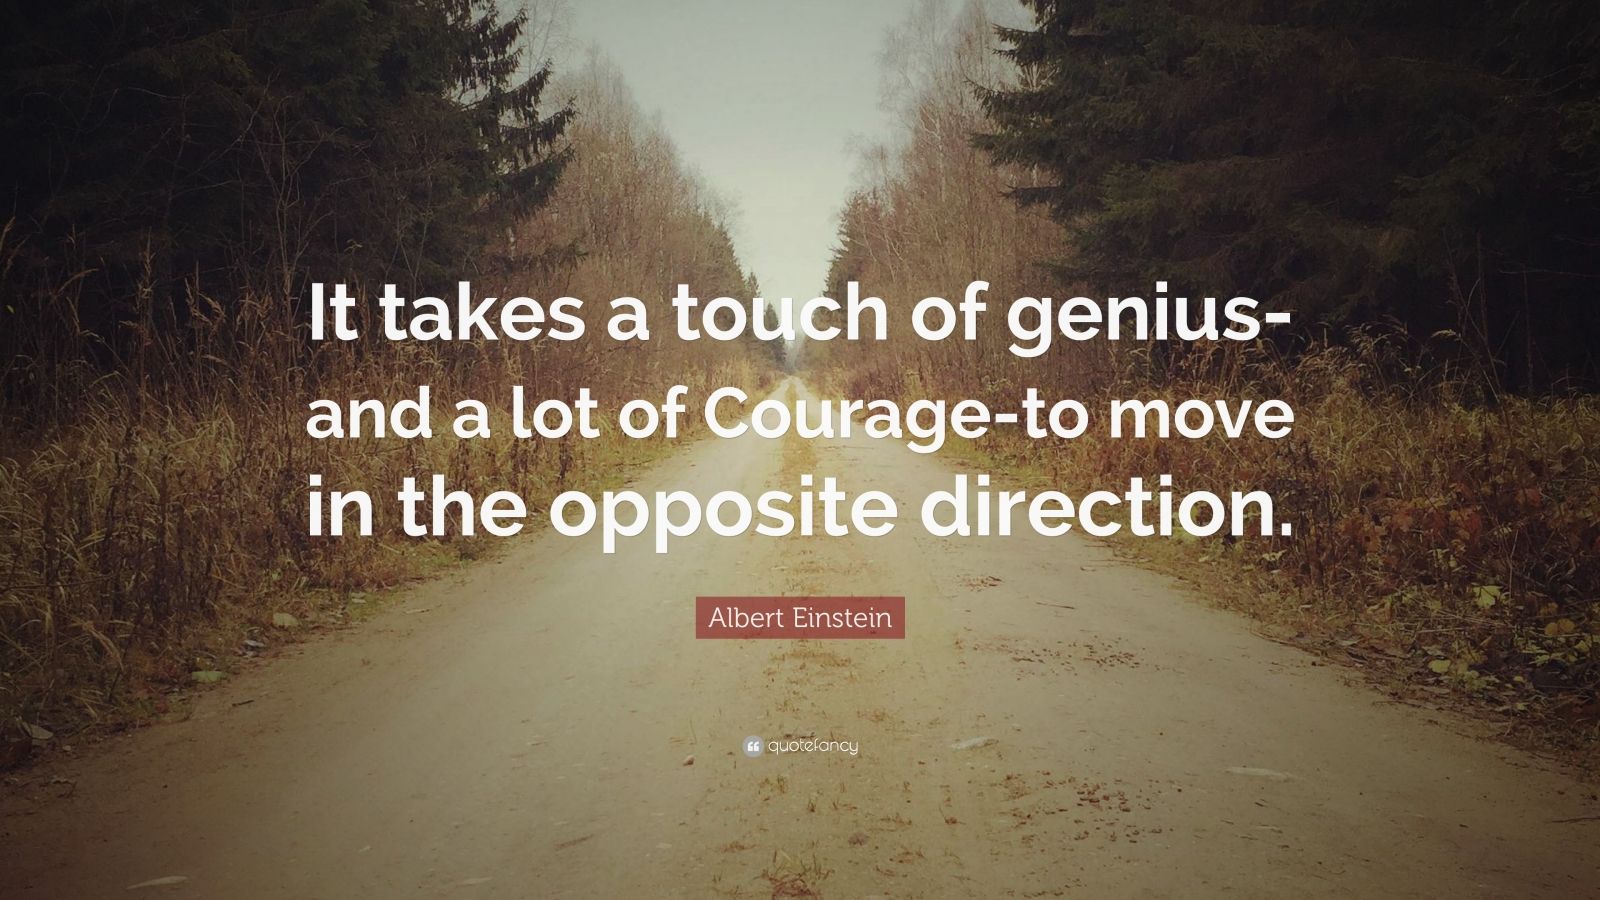 Albert Einstein Quote: “It takes a touch of genius-and a lot of Courage